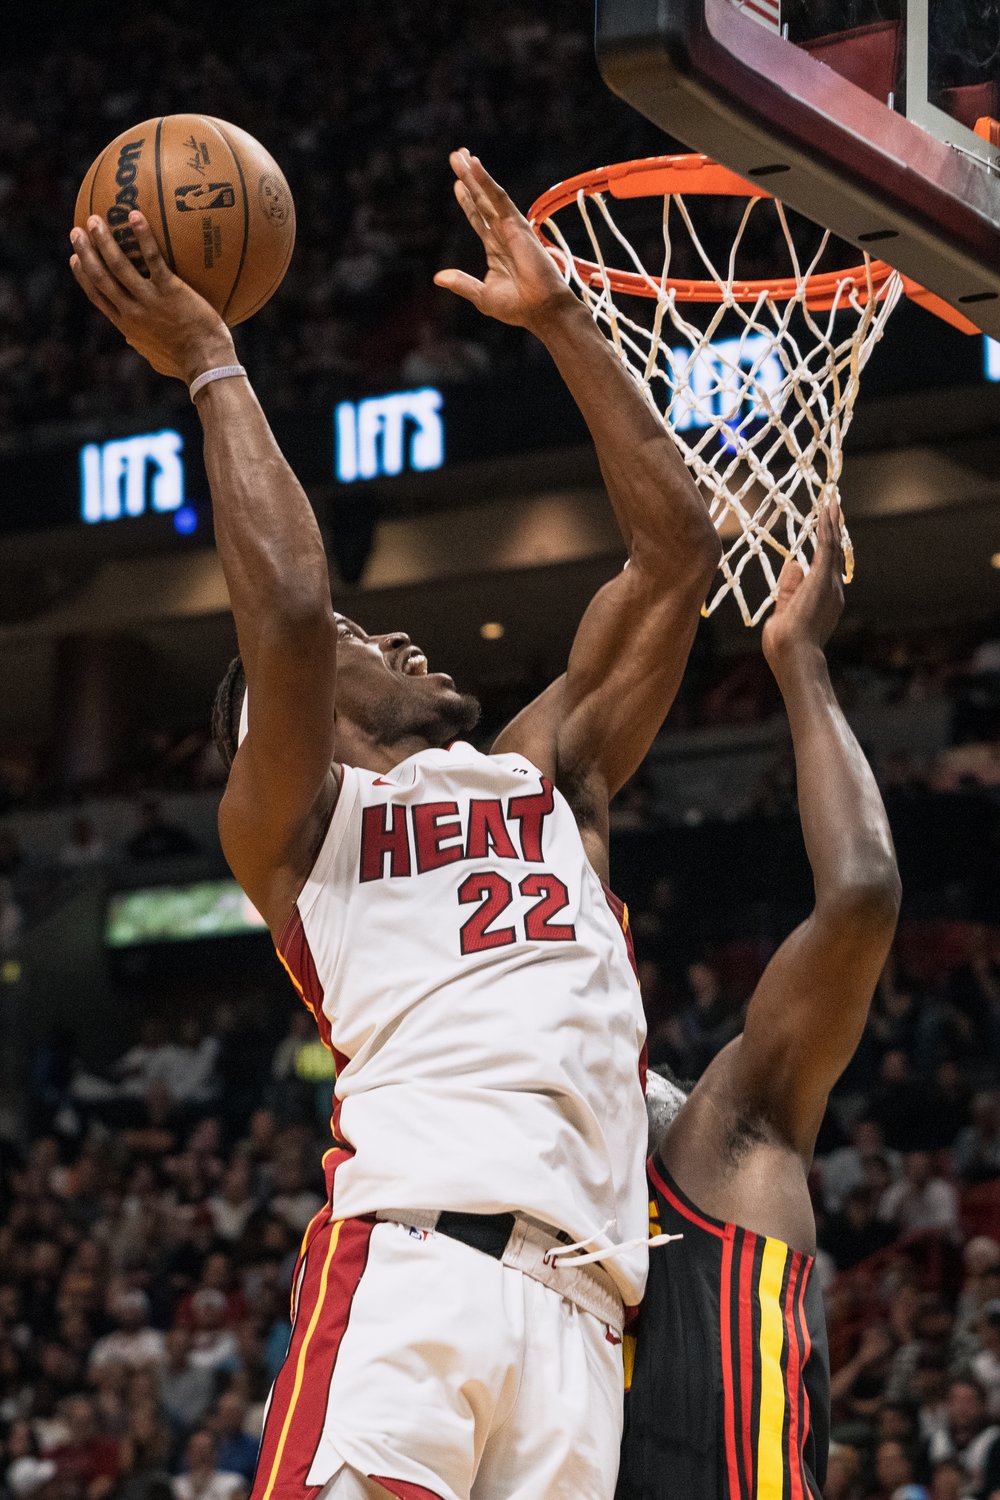  MIAMI, FL - APRIL 11: Jimmy Butler #22 of the Miami Heat scores a layup during the game against the Atlanta Hawks at Kaseya Center on April 11, 2023 in Miami, Florida. 